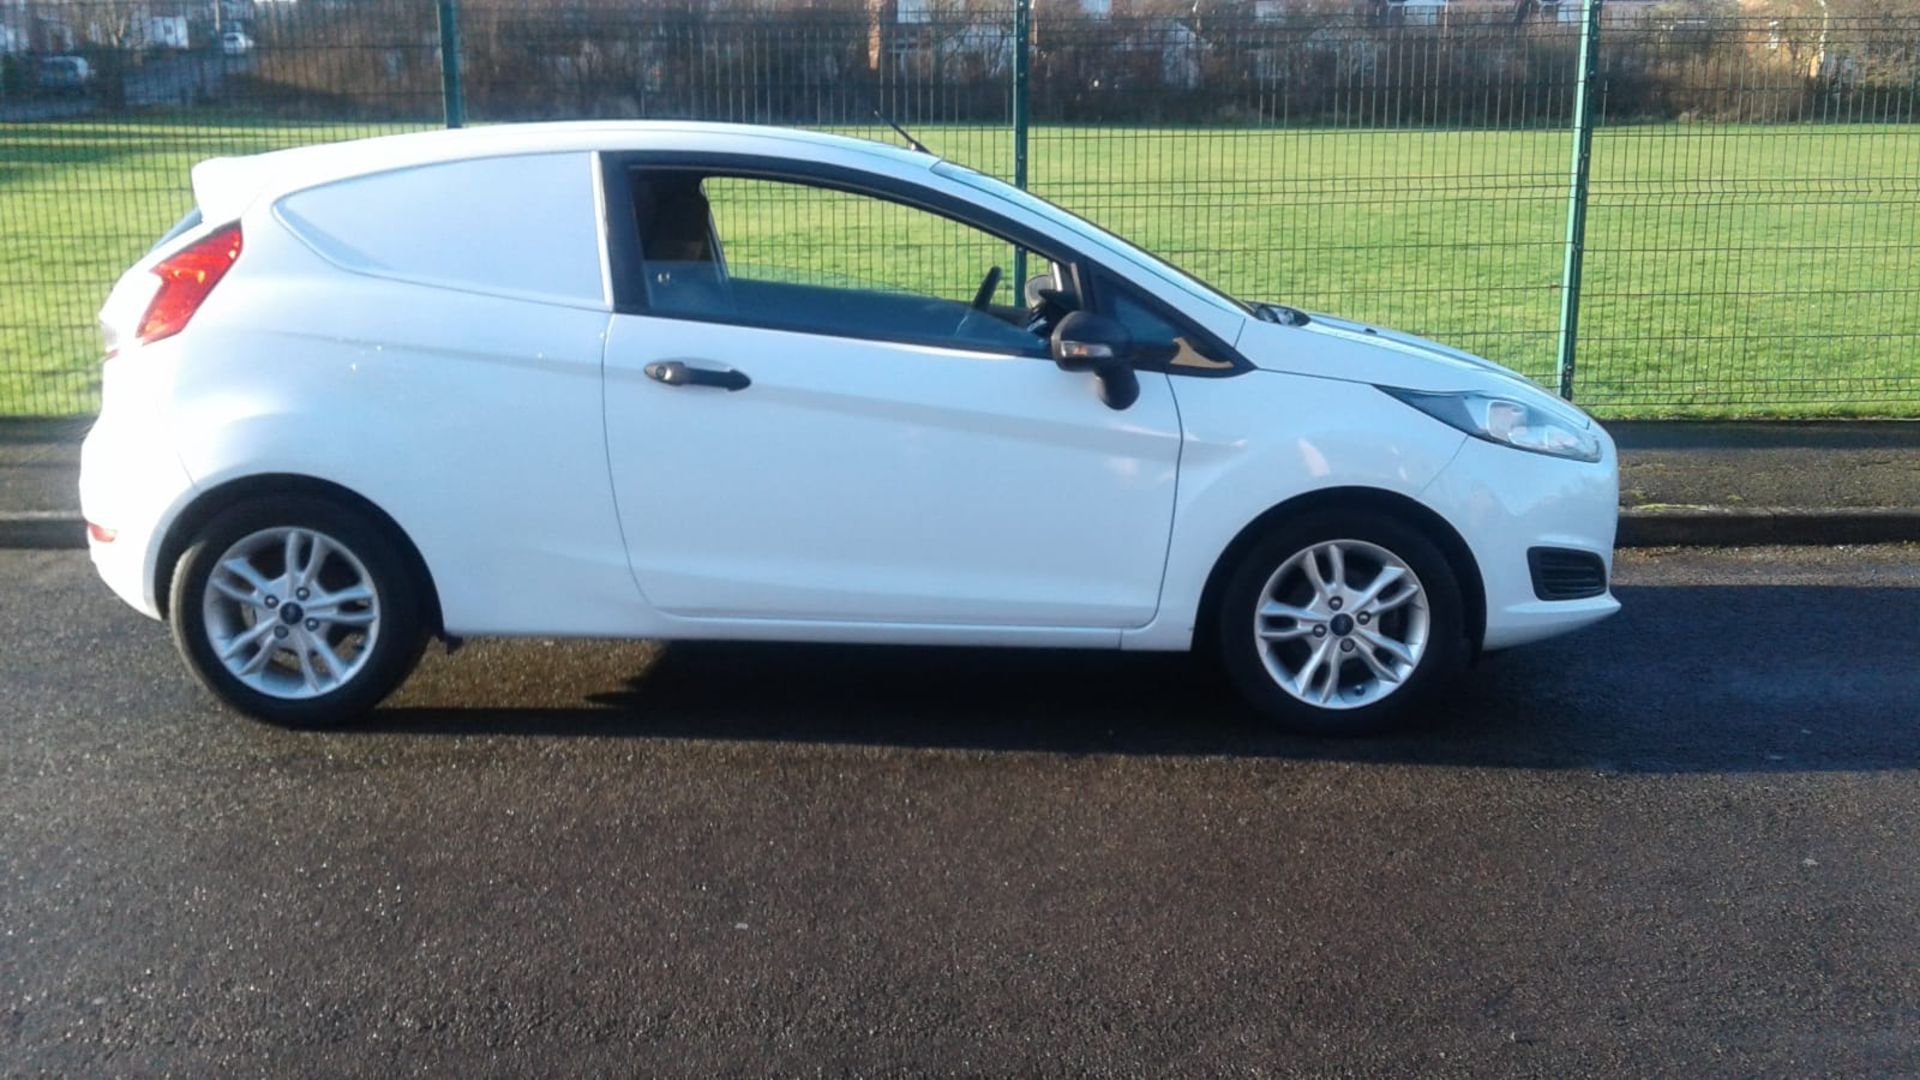 2015/15 REG FORD FIESTA ECONETIC TECH TDCI 1.6 CAR DERIVED VAN, SHOWING 0 FORMER KEEPERS *NO VAT* - Image 7 of 12